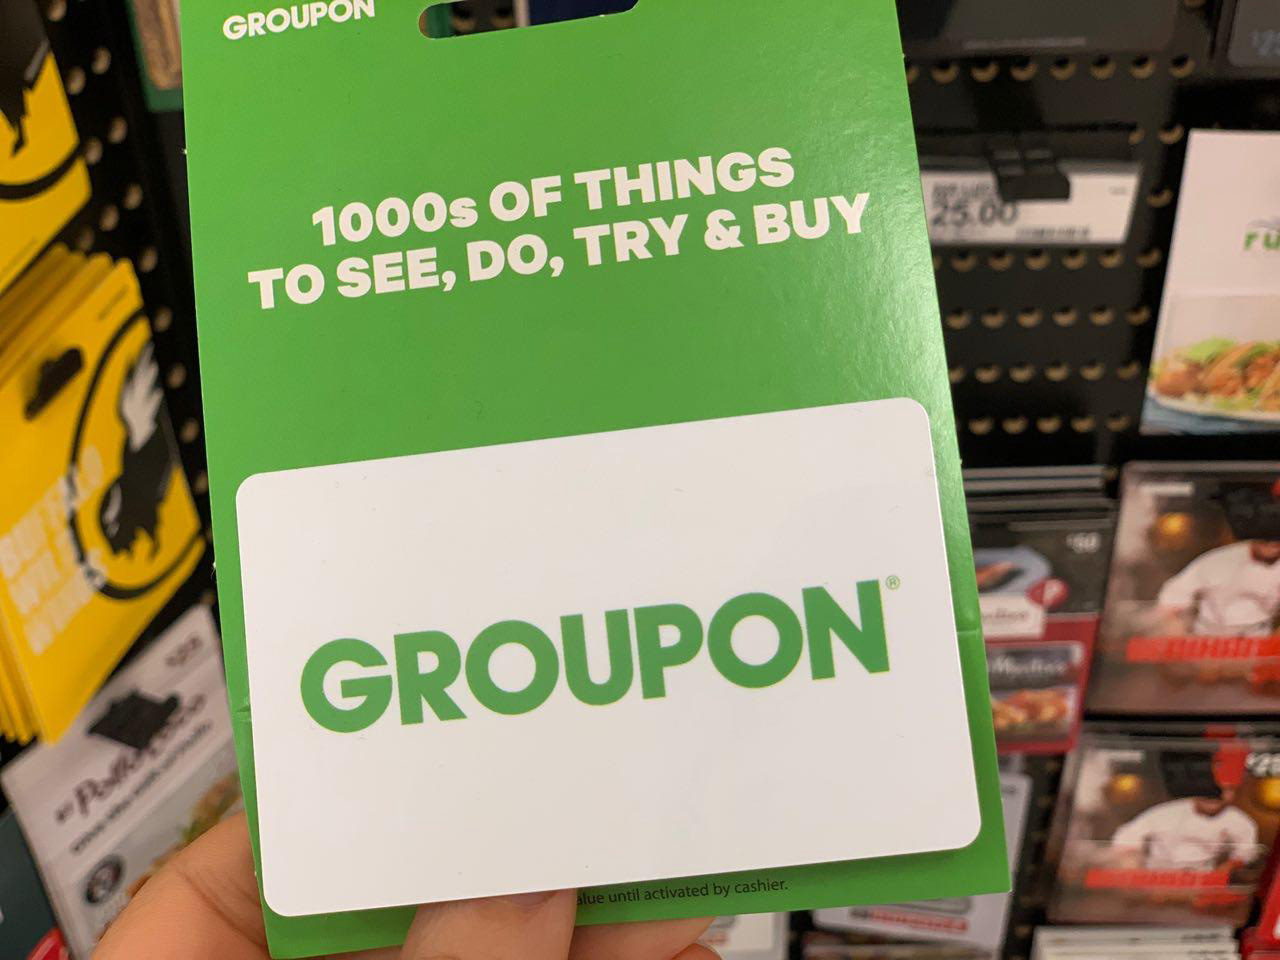 Groupon Promotion Offers